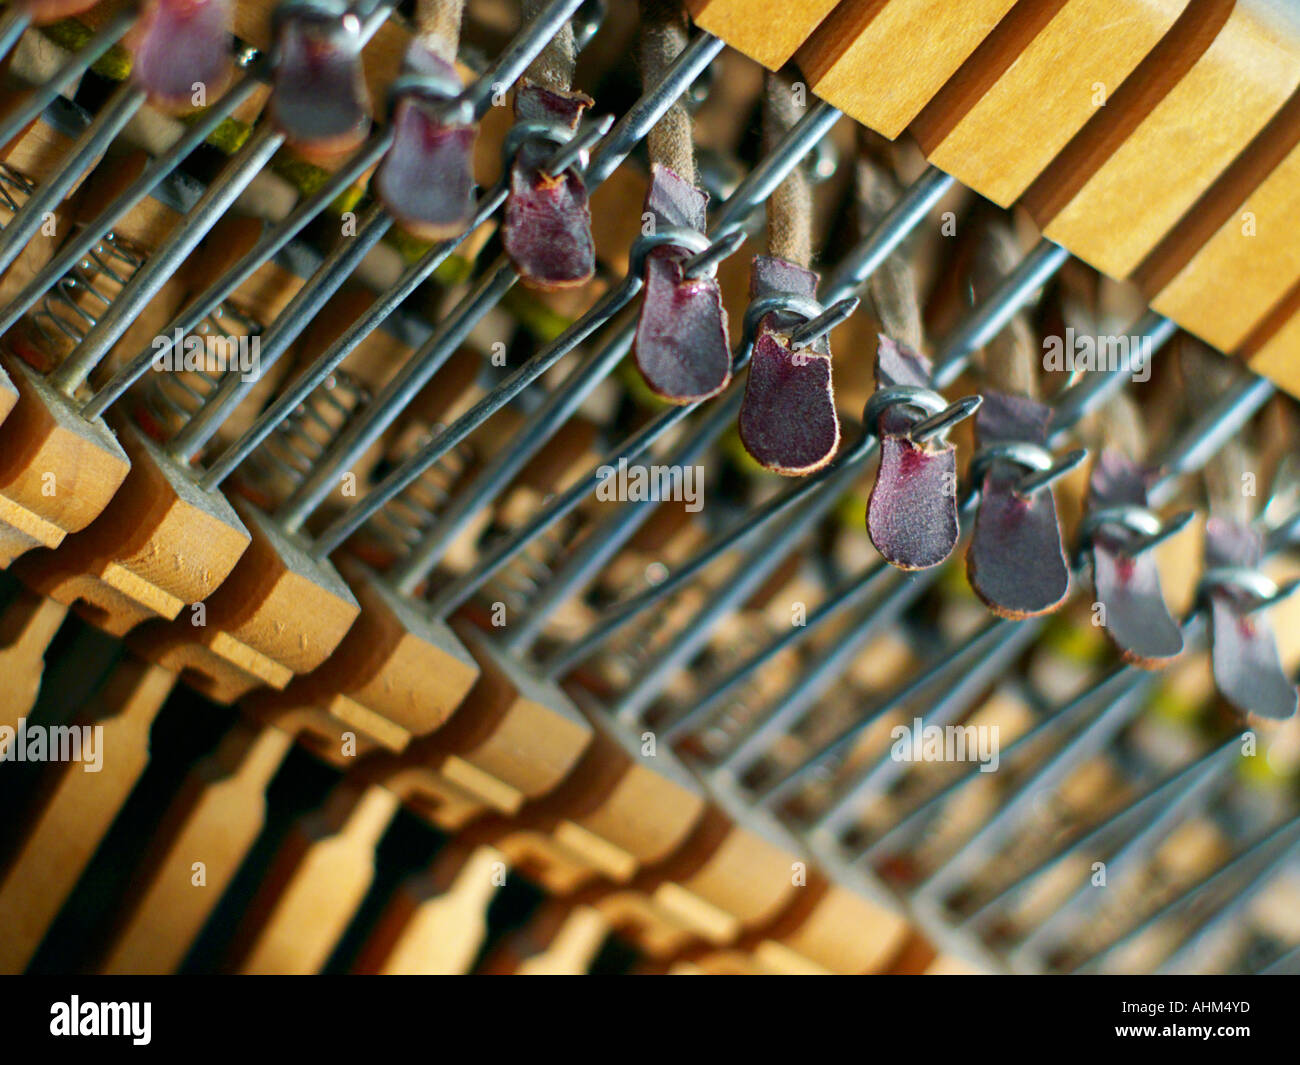 Wood, wire, and leather mallet linkages inside a piano's soundbox that enable the striking of strings Stock Photo